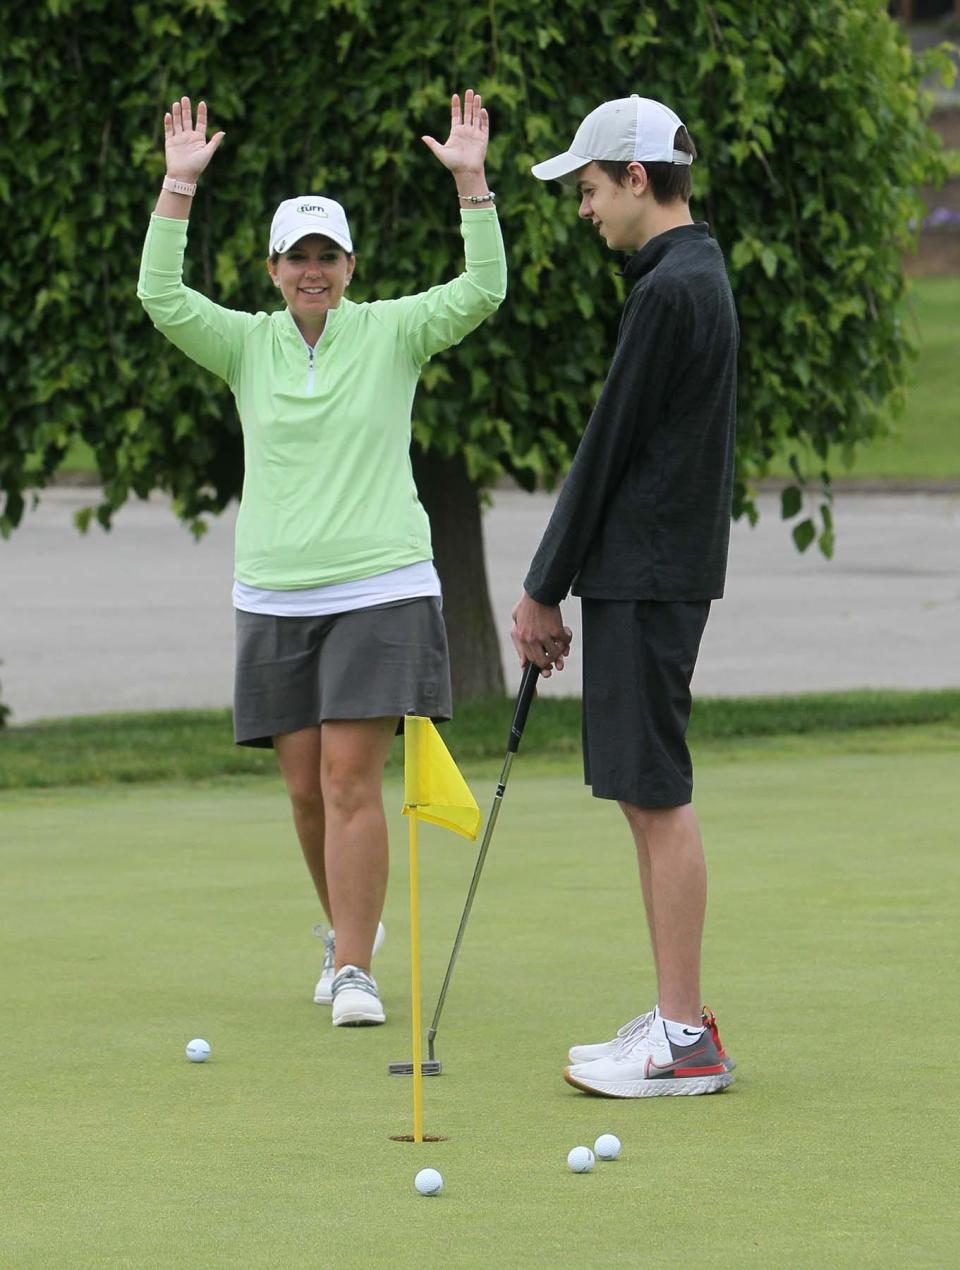 Huston Nagy, 16, right, of North Olmsted, smiles as his coach Erin Craig reacts to him sinking a putt on the putting green at Firestone Country Club on Monday in Akron.